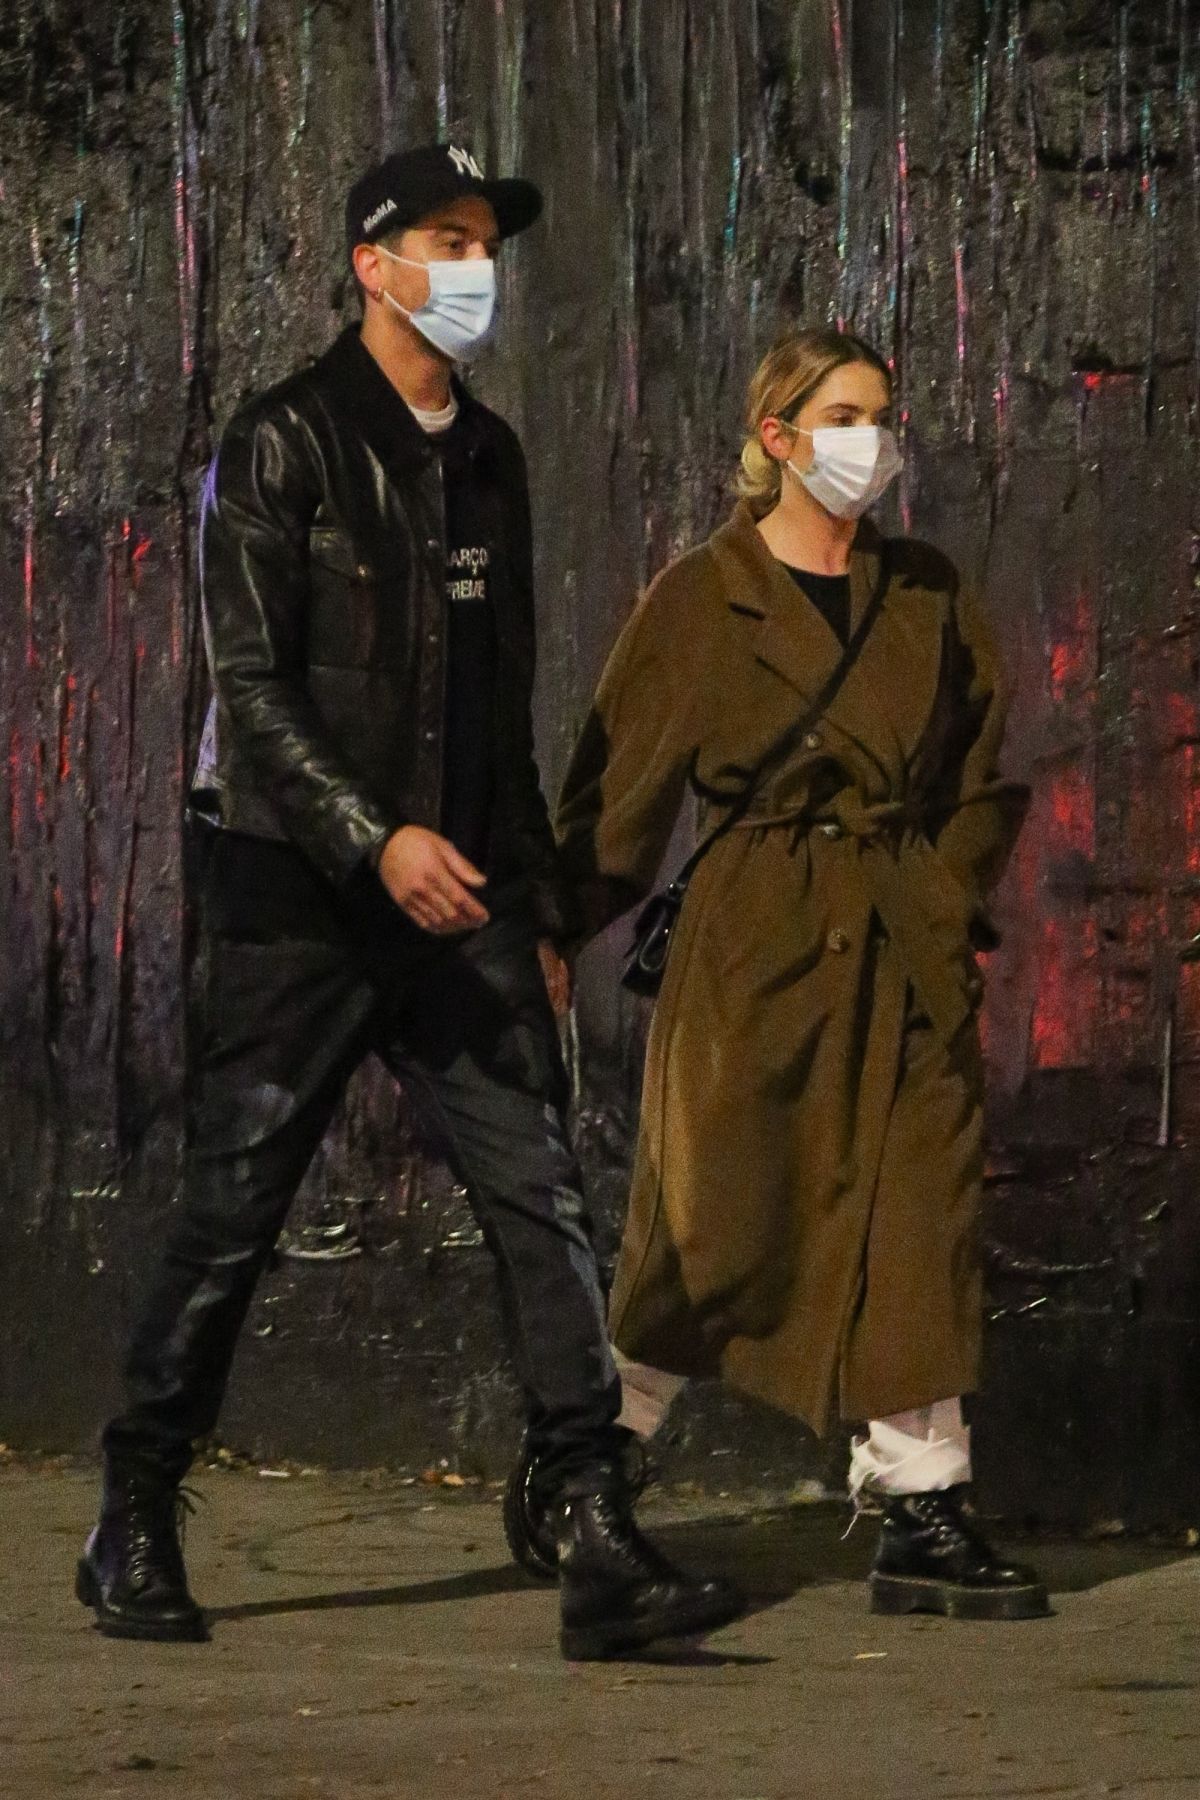 ashley-benson-and-g-eazy-out-in-new-york-11-16-2020-12.jpg